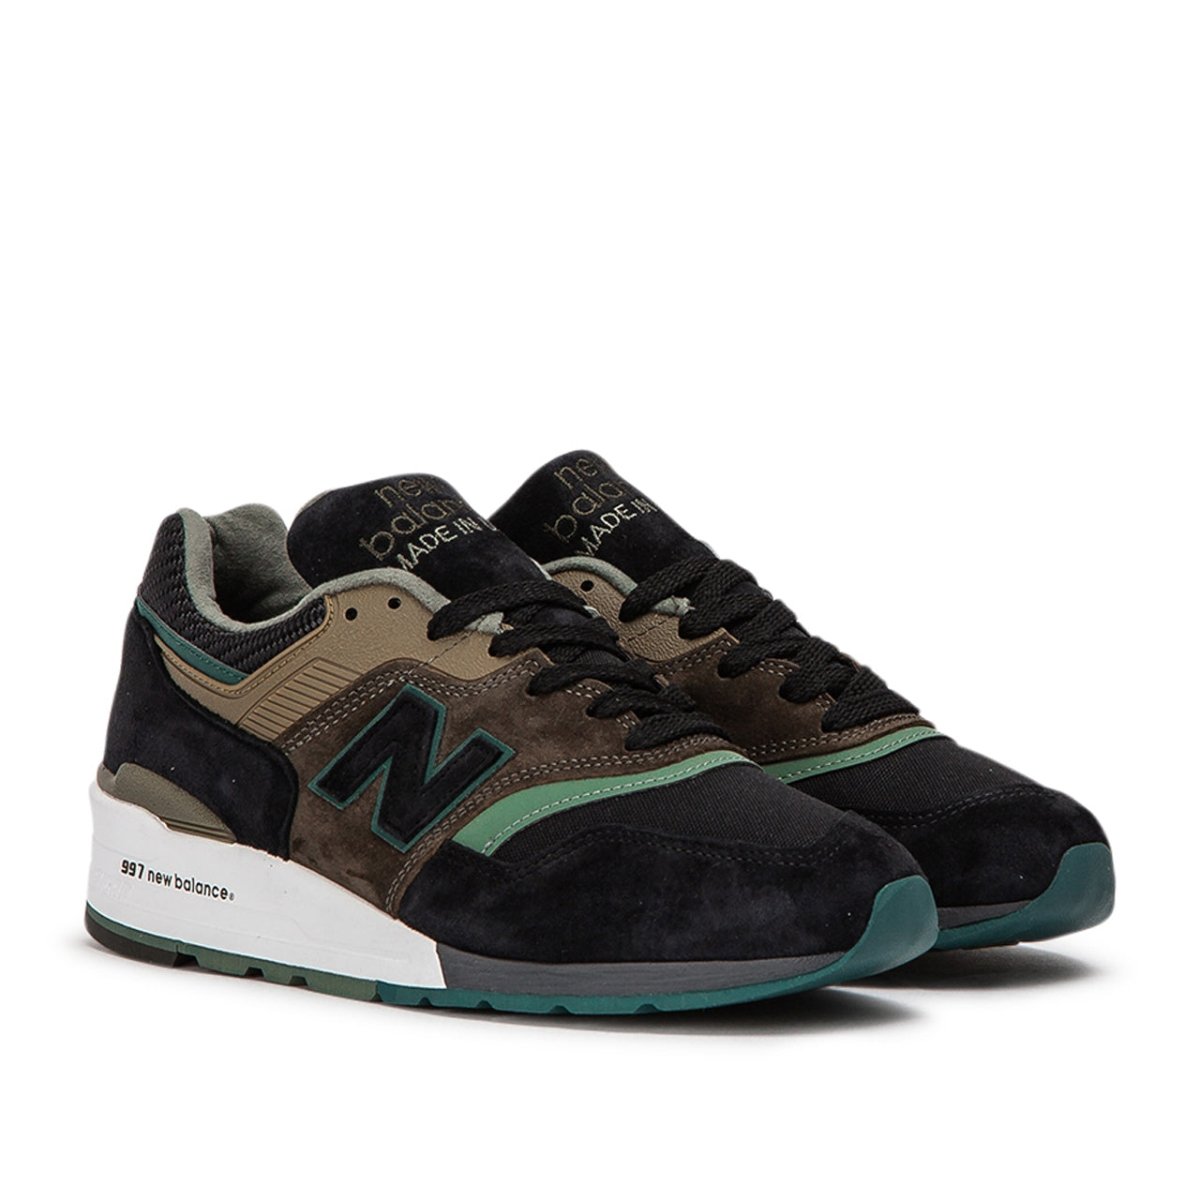 New Balance M997 PAA 'Made in USA' (Schwarz / Olive)  - Allike Store